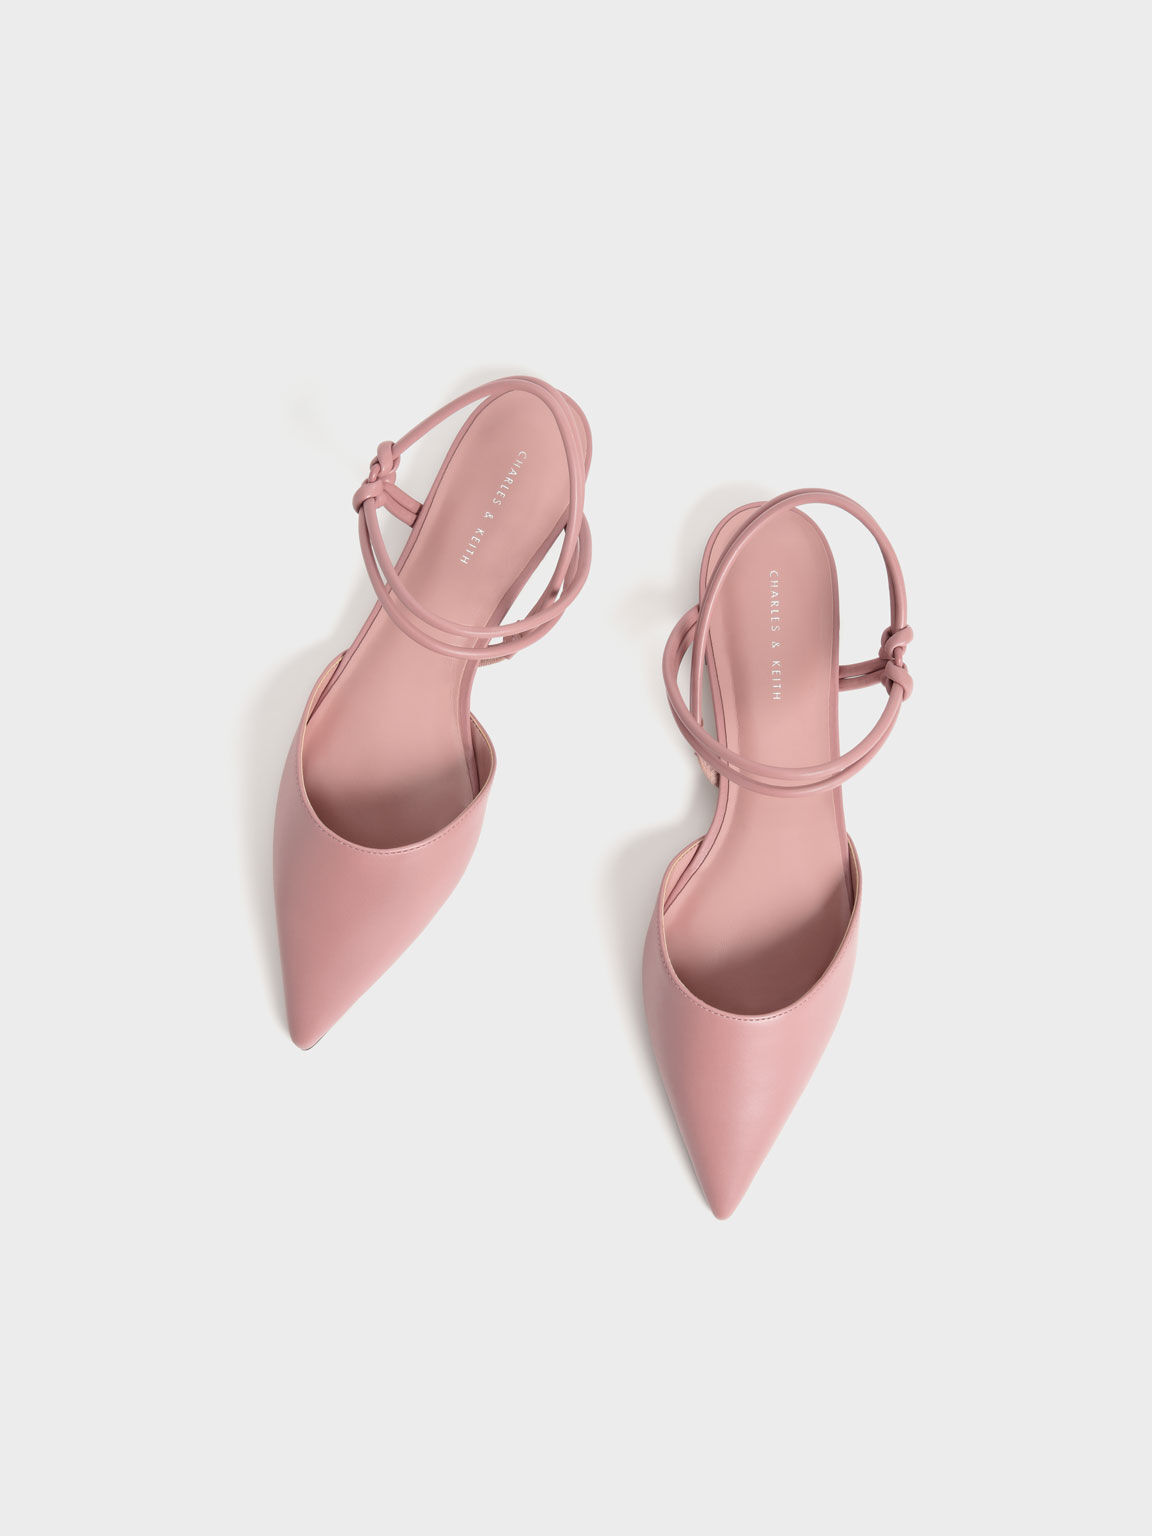 Knotted Ankle-Strap Ballerina Flats, Pink, hi-res